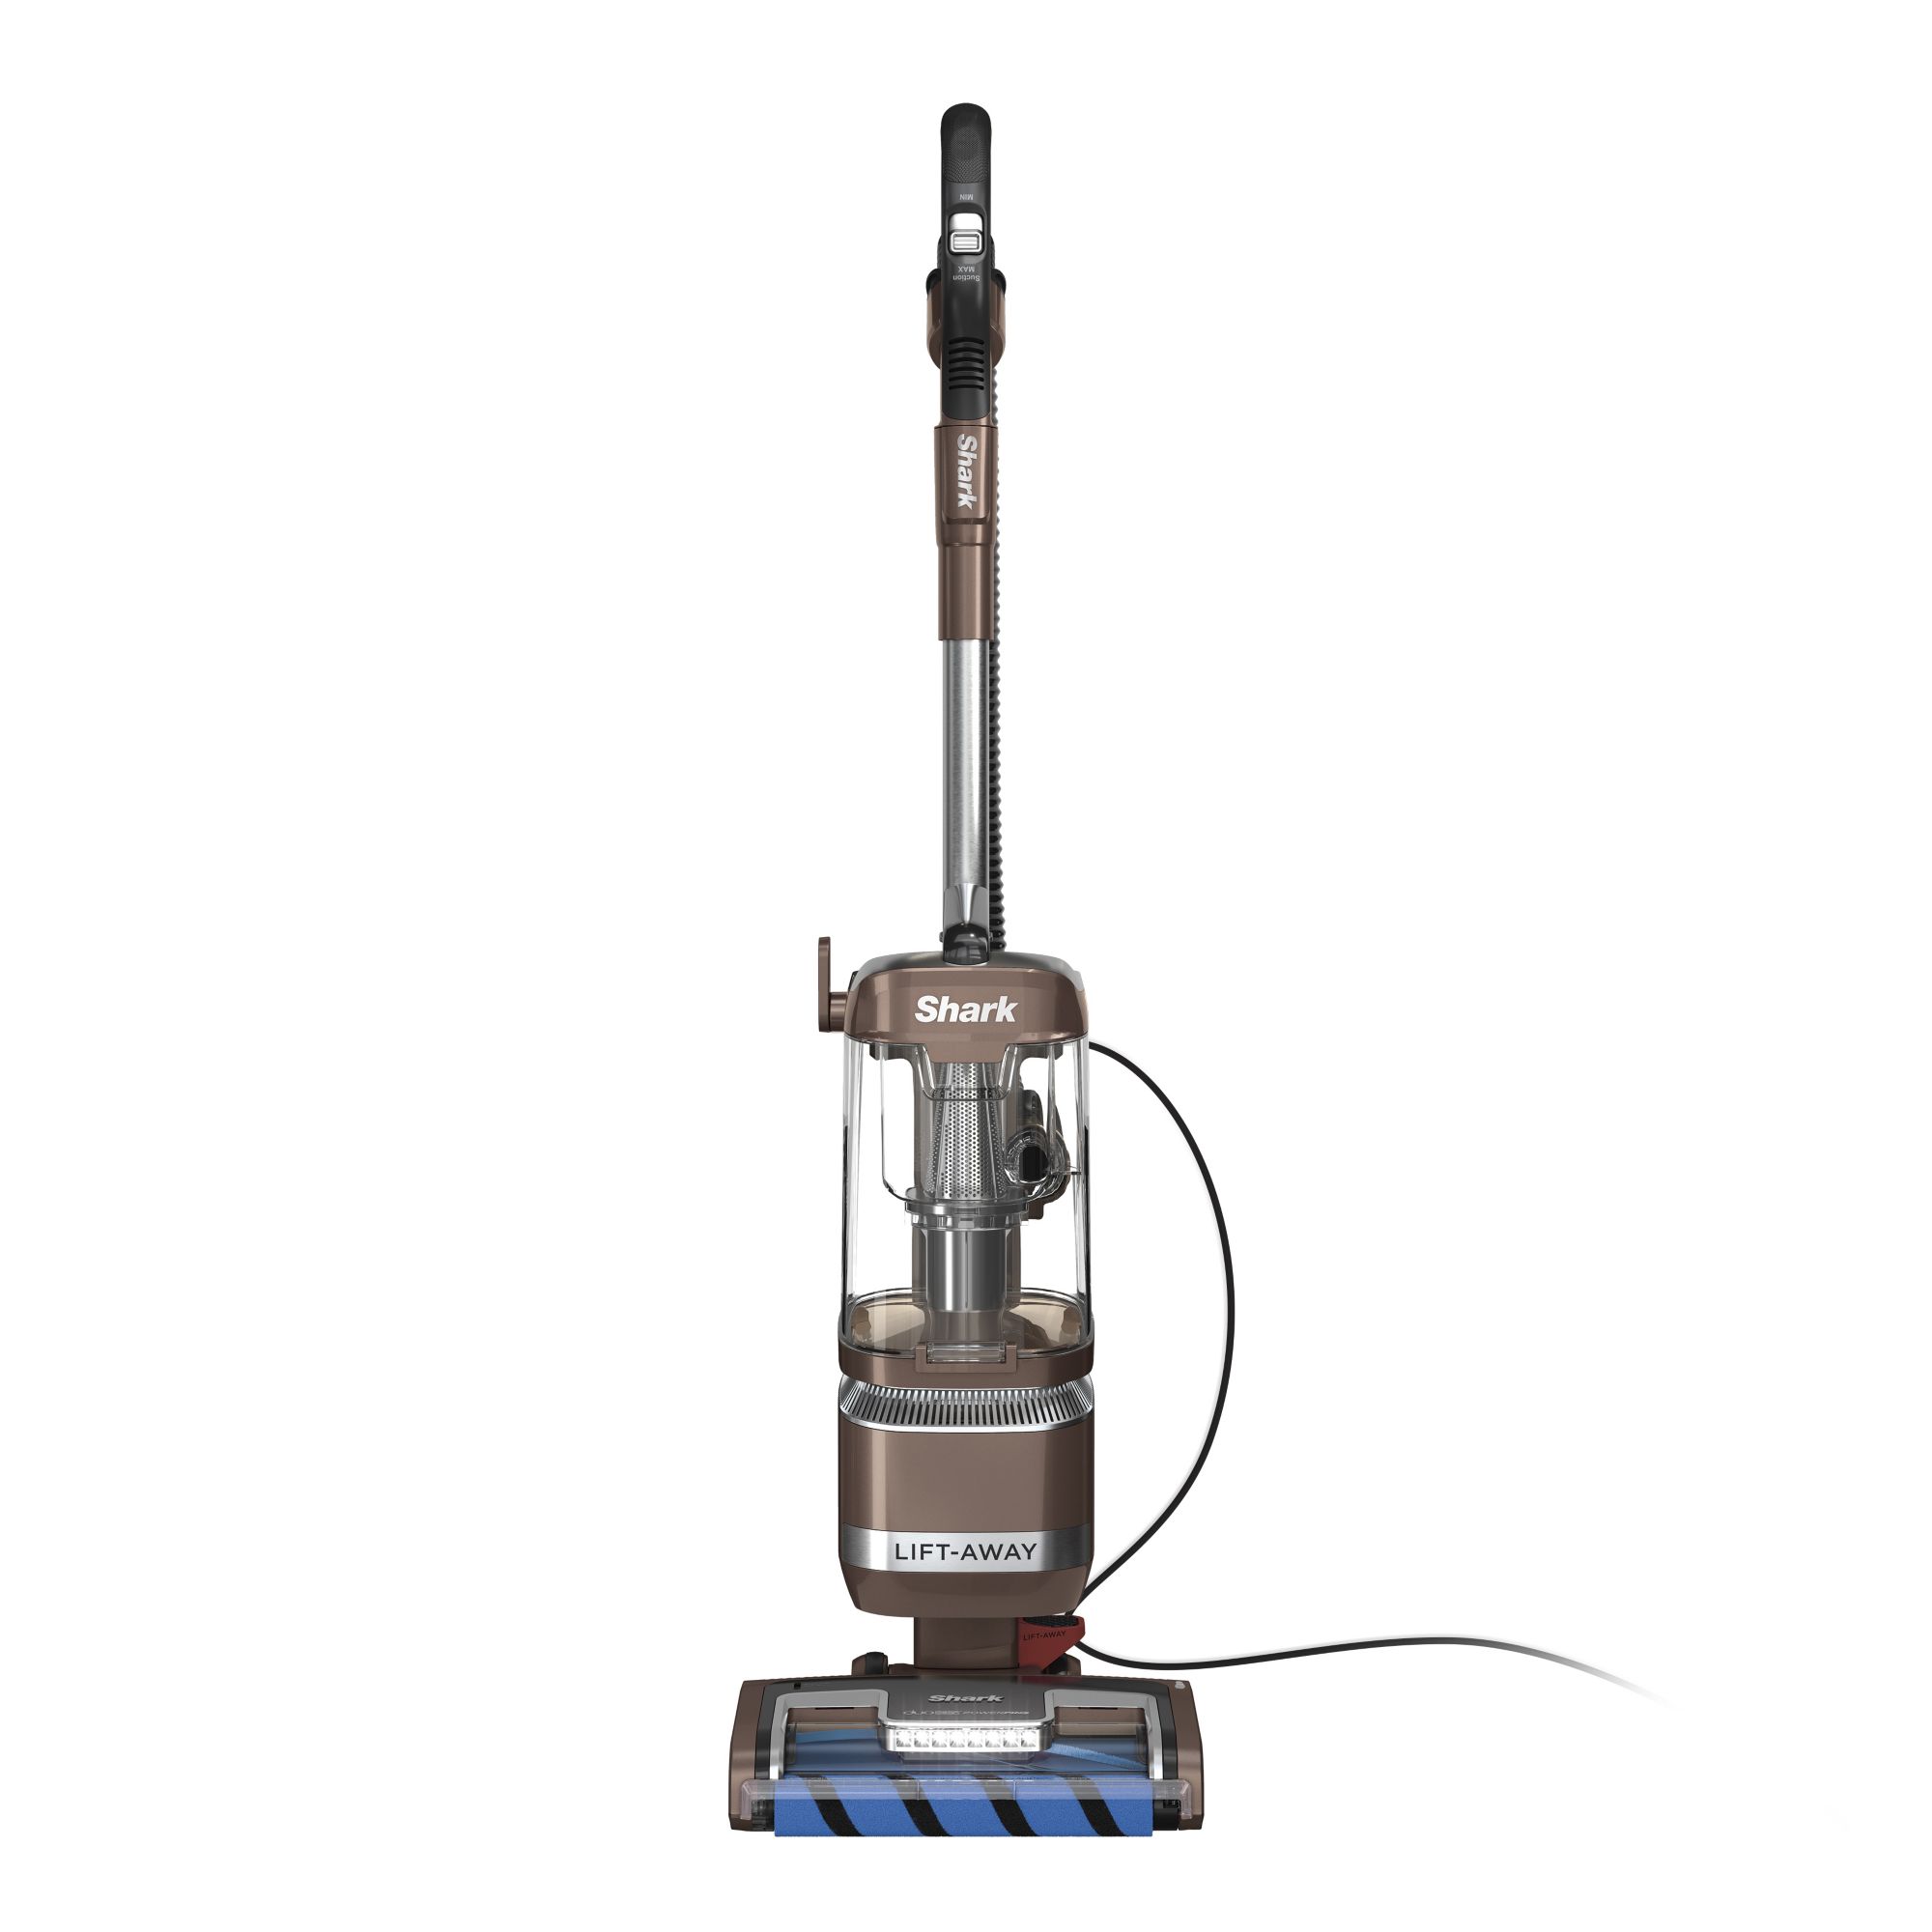 Shark Rotator Pet Pro Lift-Away ADV DuoClean PowerFins Upright Vacuum with Self-Cleaning Brush Roll